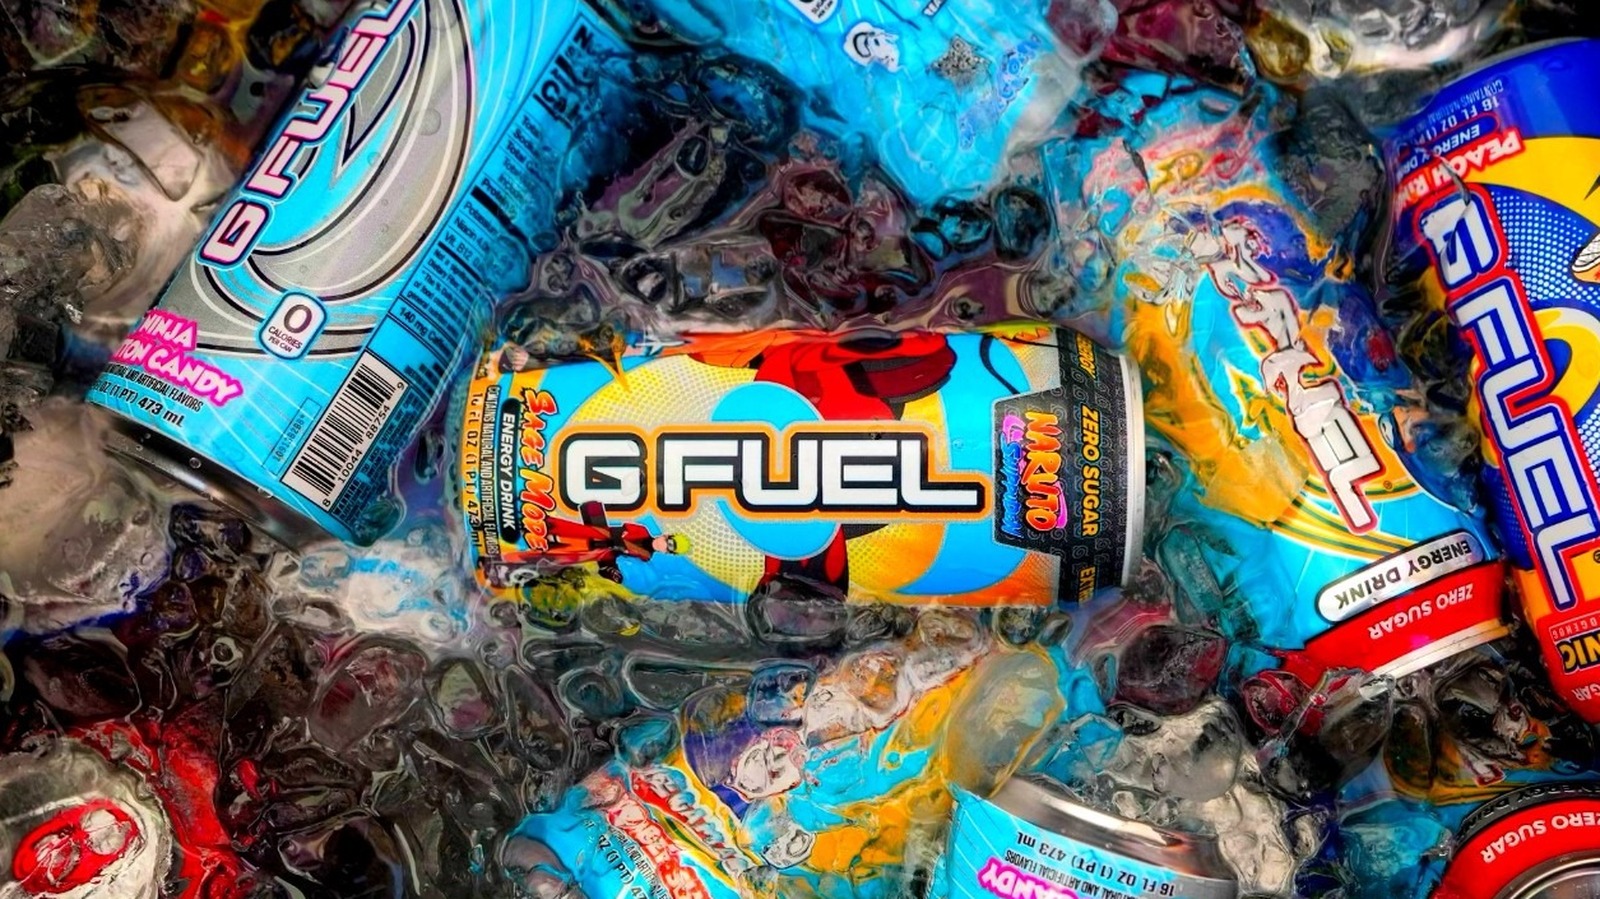 Can't wait for this to ship! : r/GFUEL